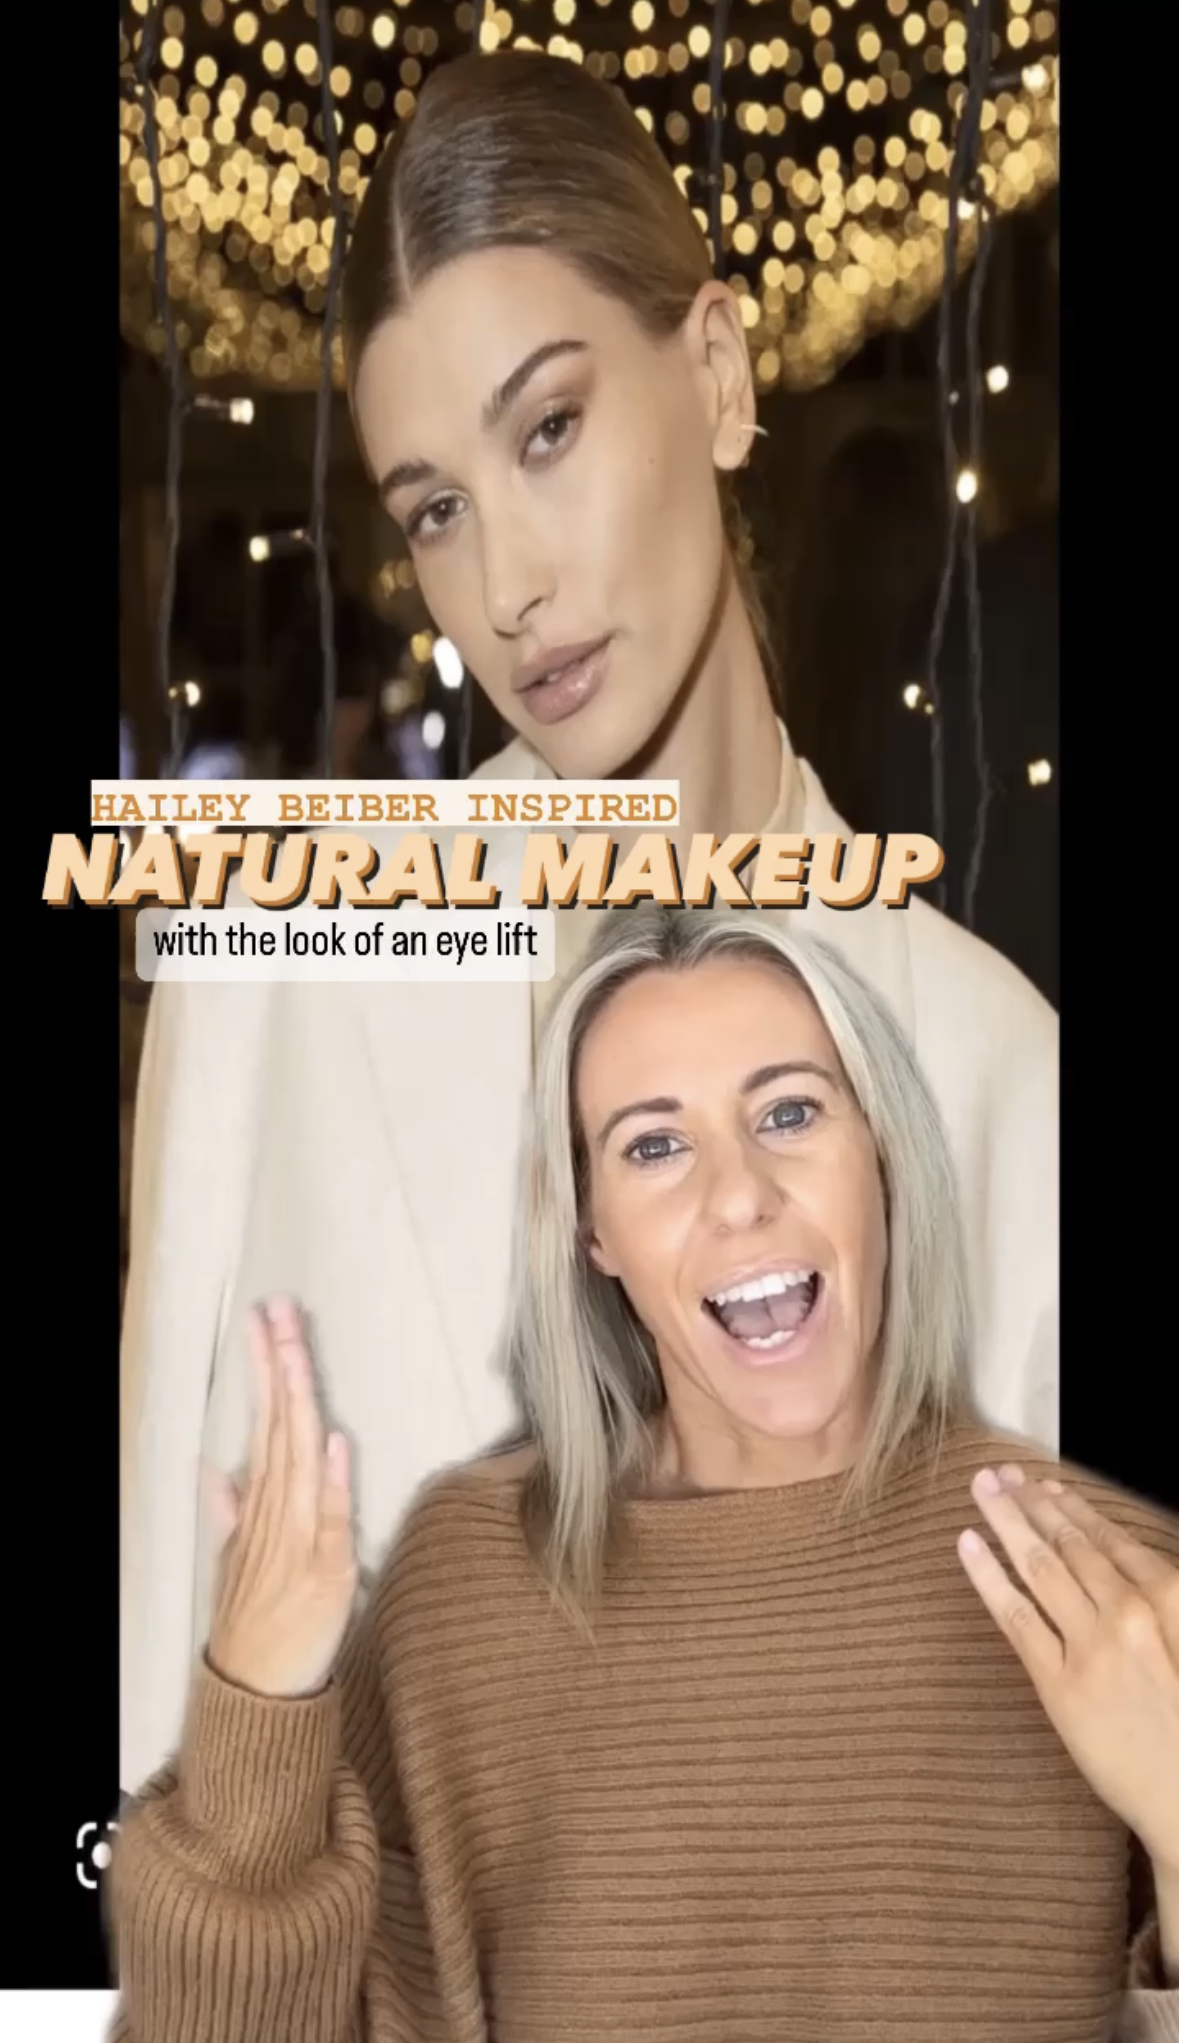 Hailey Beiber inspired natural makeup on a budget-Jaclyn De Leon style. Full makeup tutorial inspired by Haley Beiber. All items found at Walmart and all under $10!